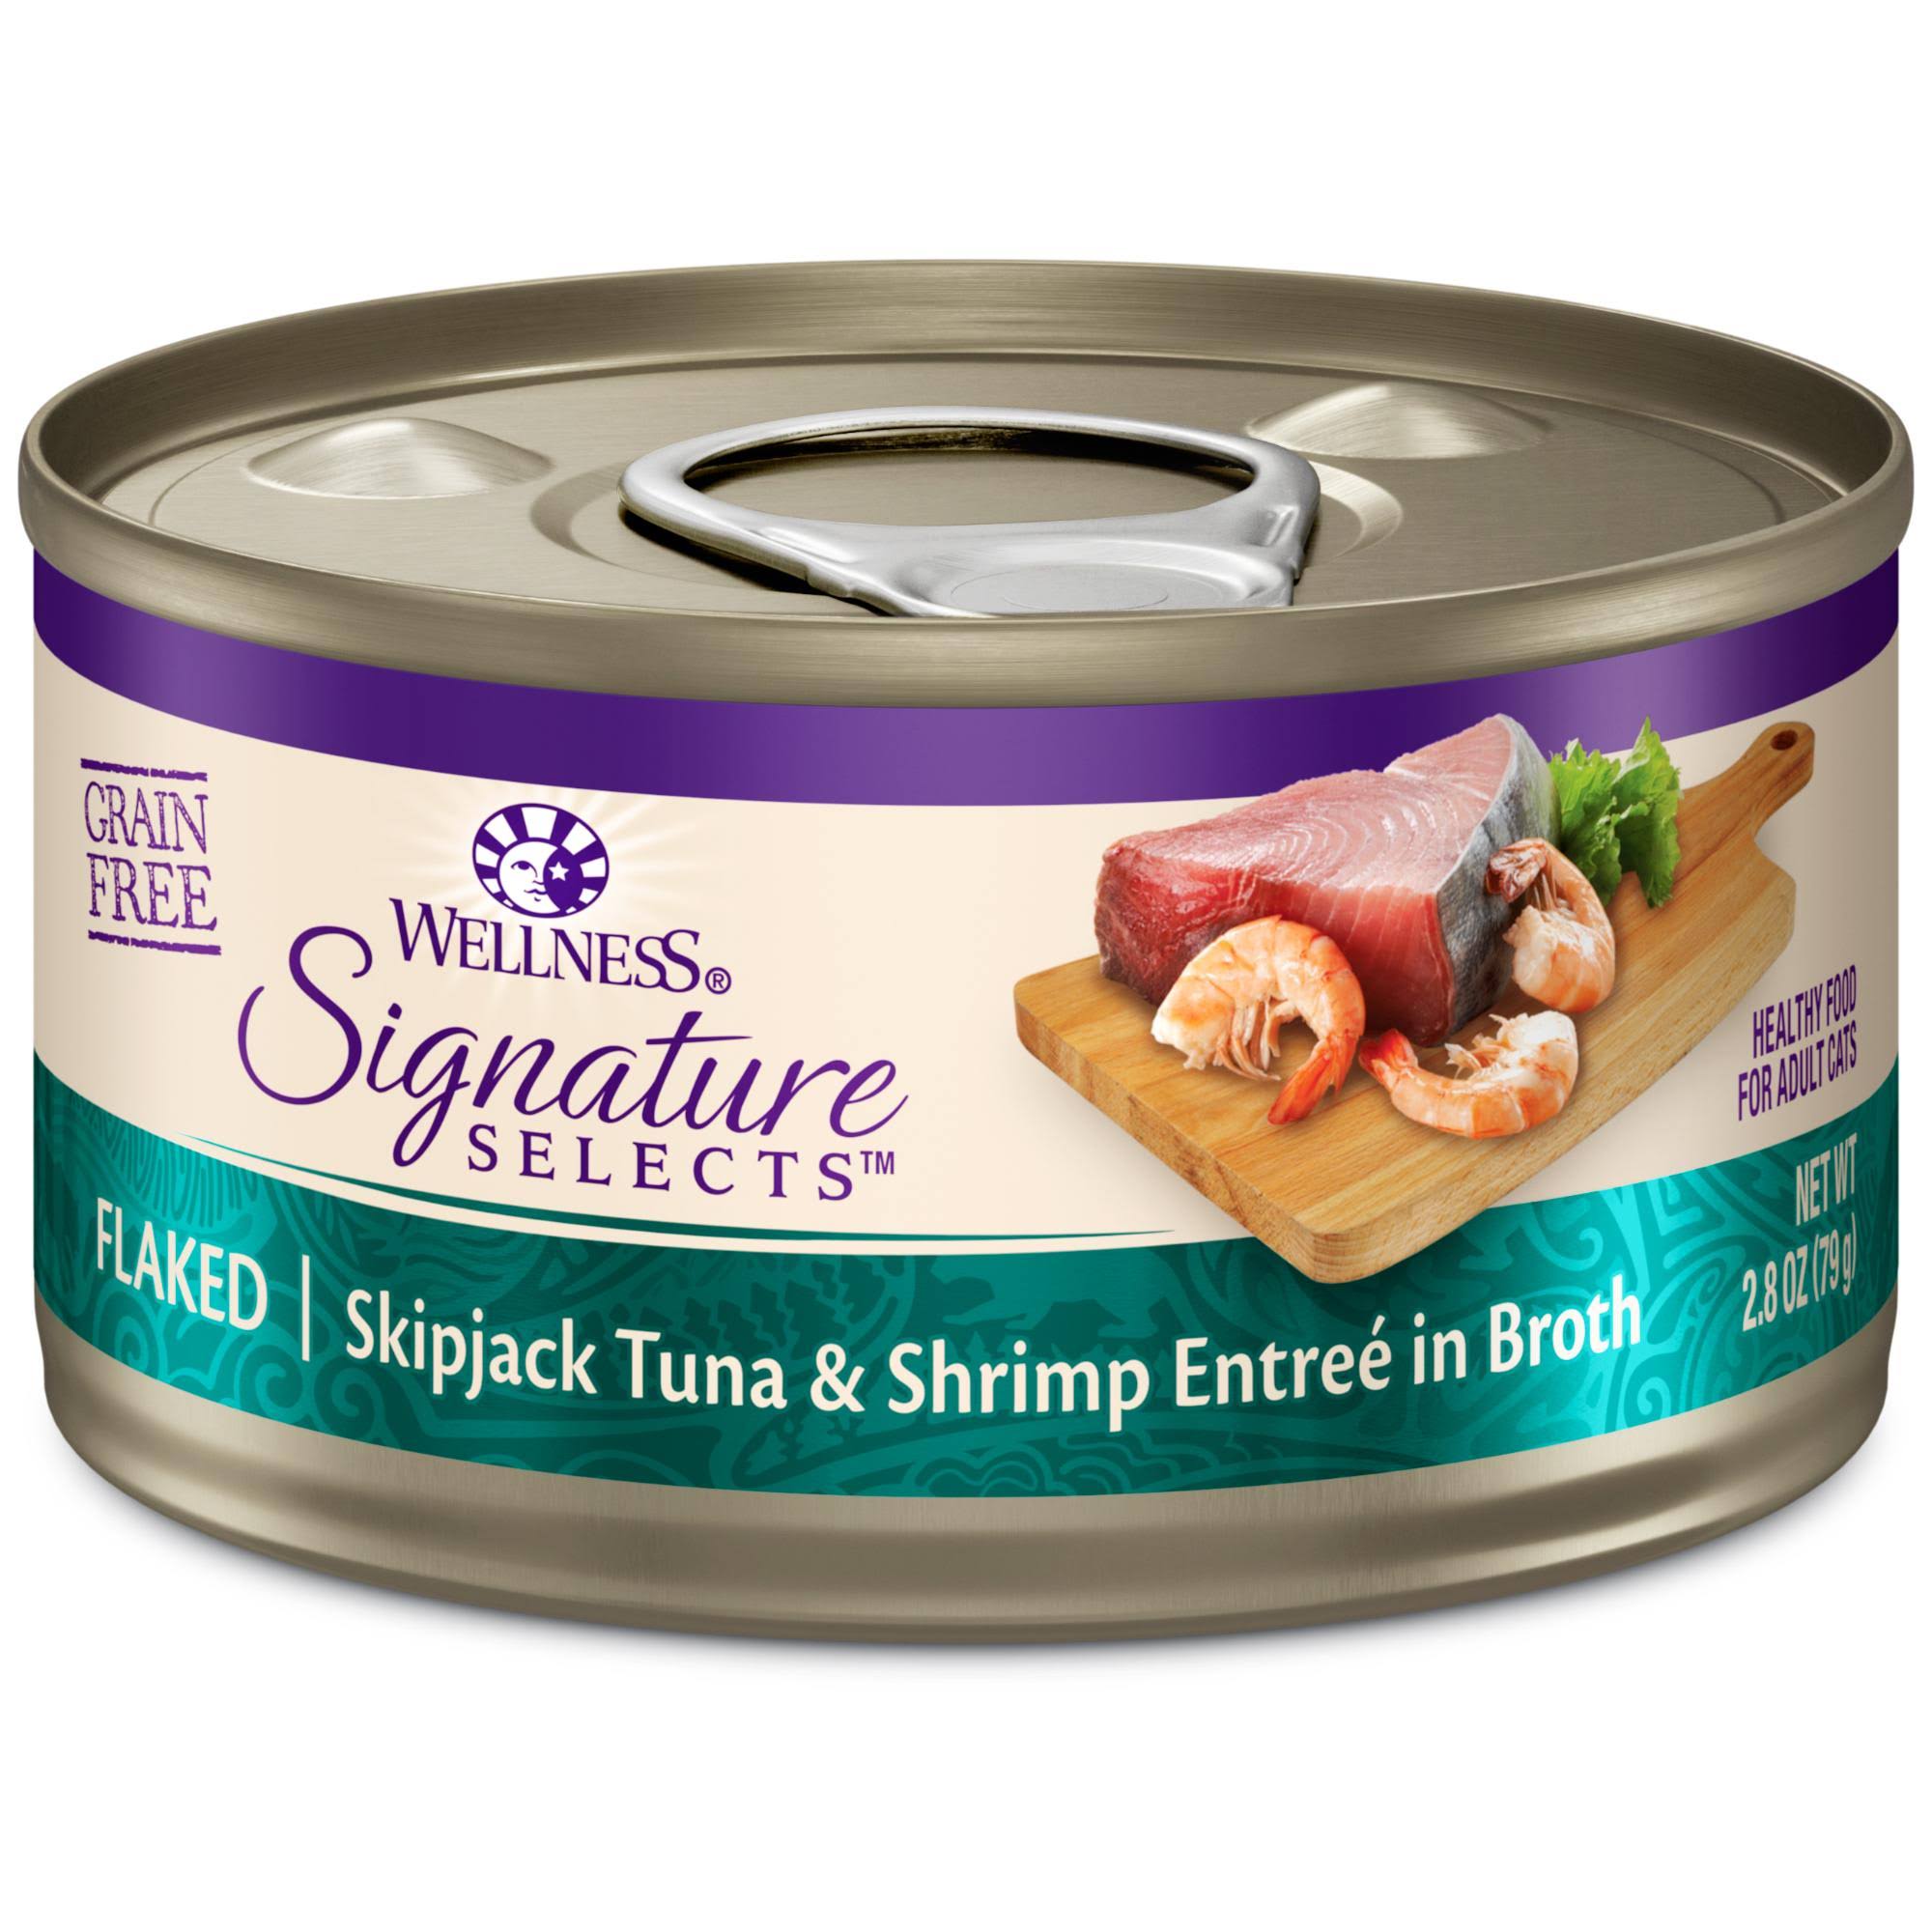 Wellness Signature Selects Grain Free Cat Food - Flaked Skipjack Tuna with Shrimp Entree in Broth